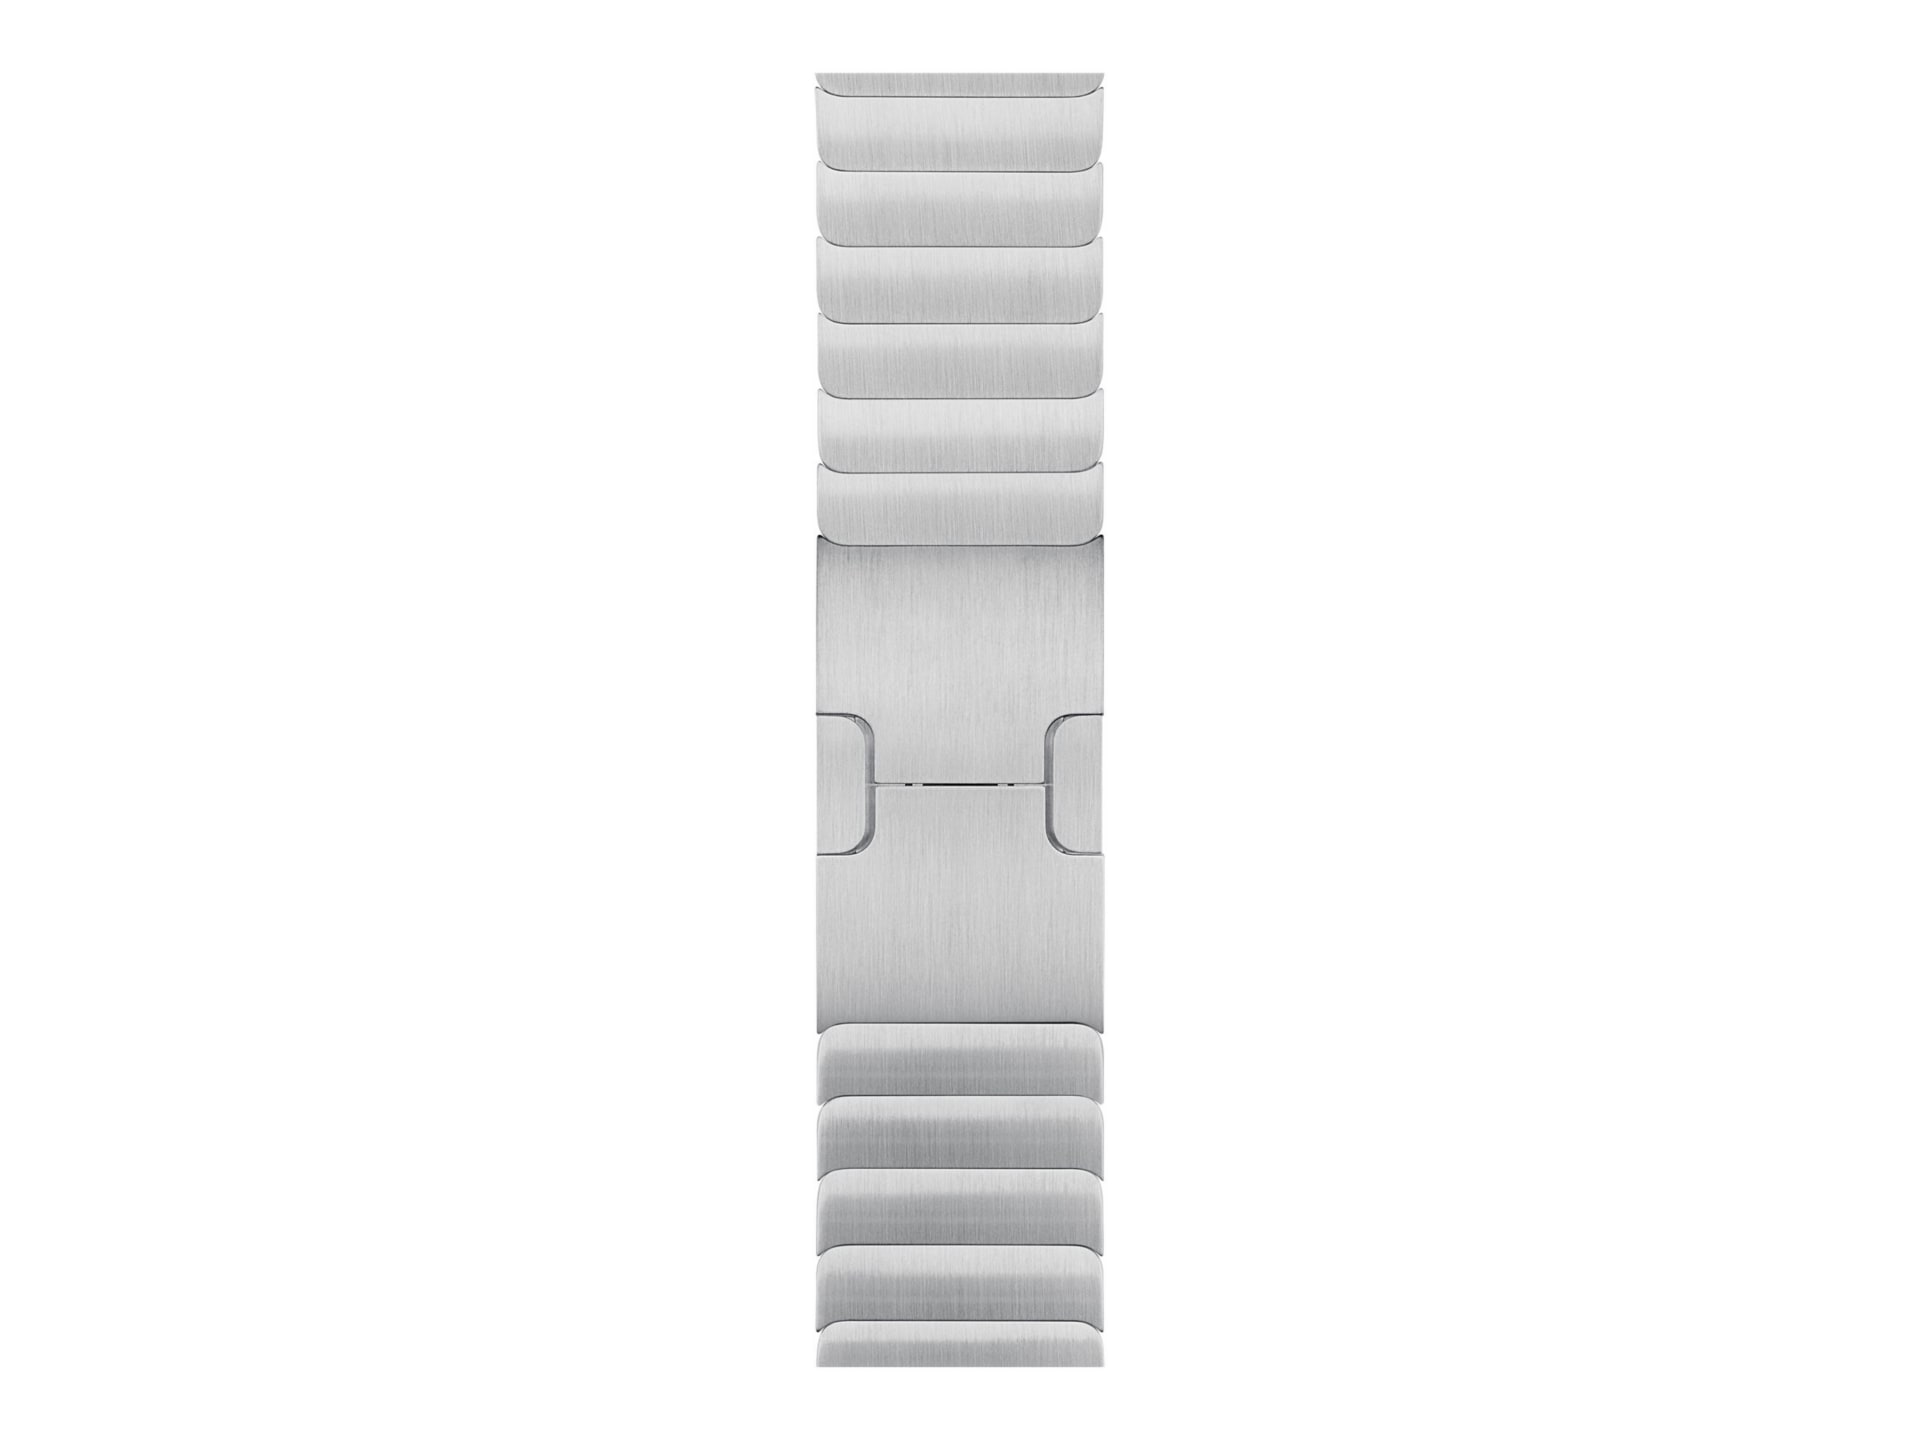 Apple - strap for smart watch - 42mm